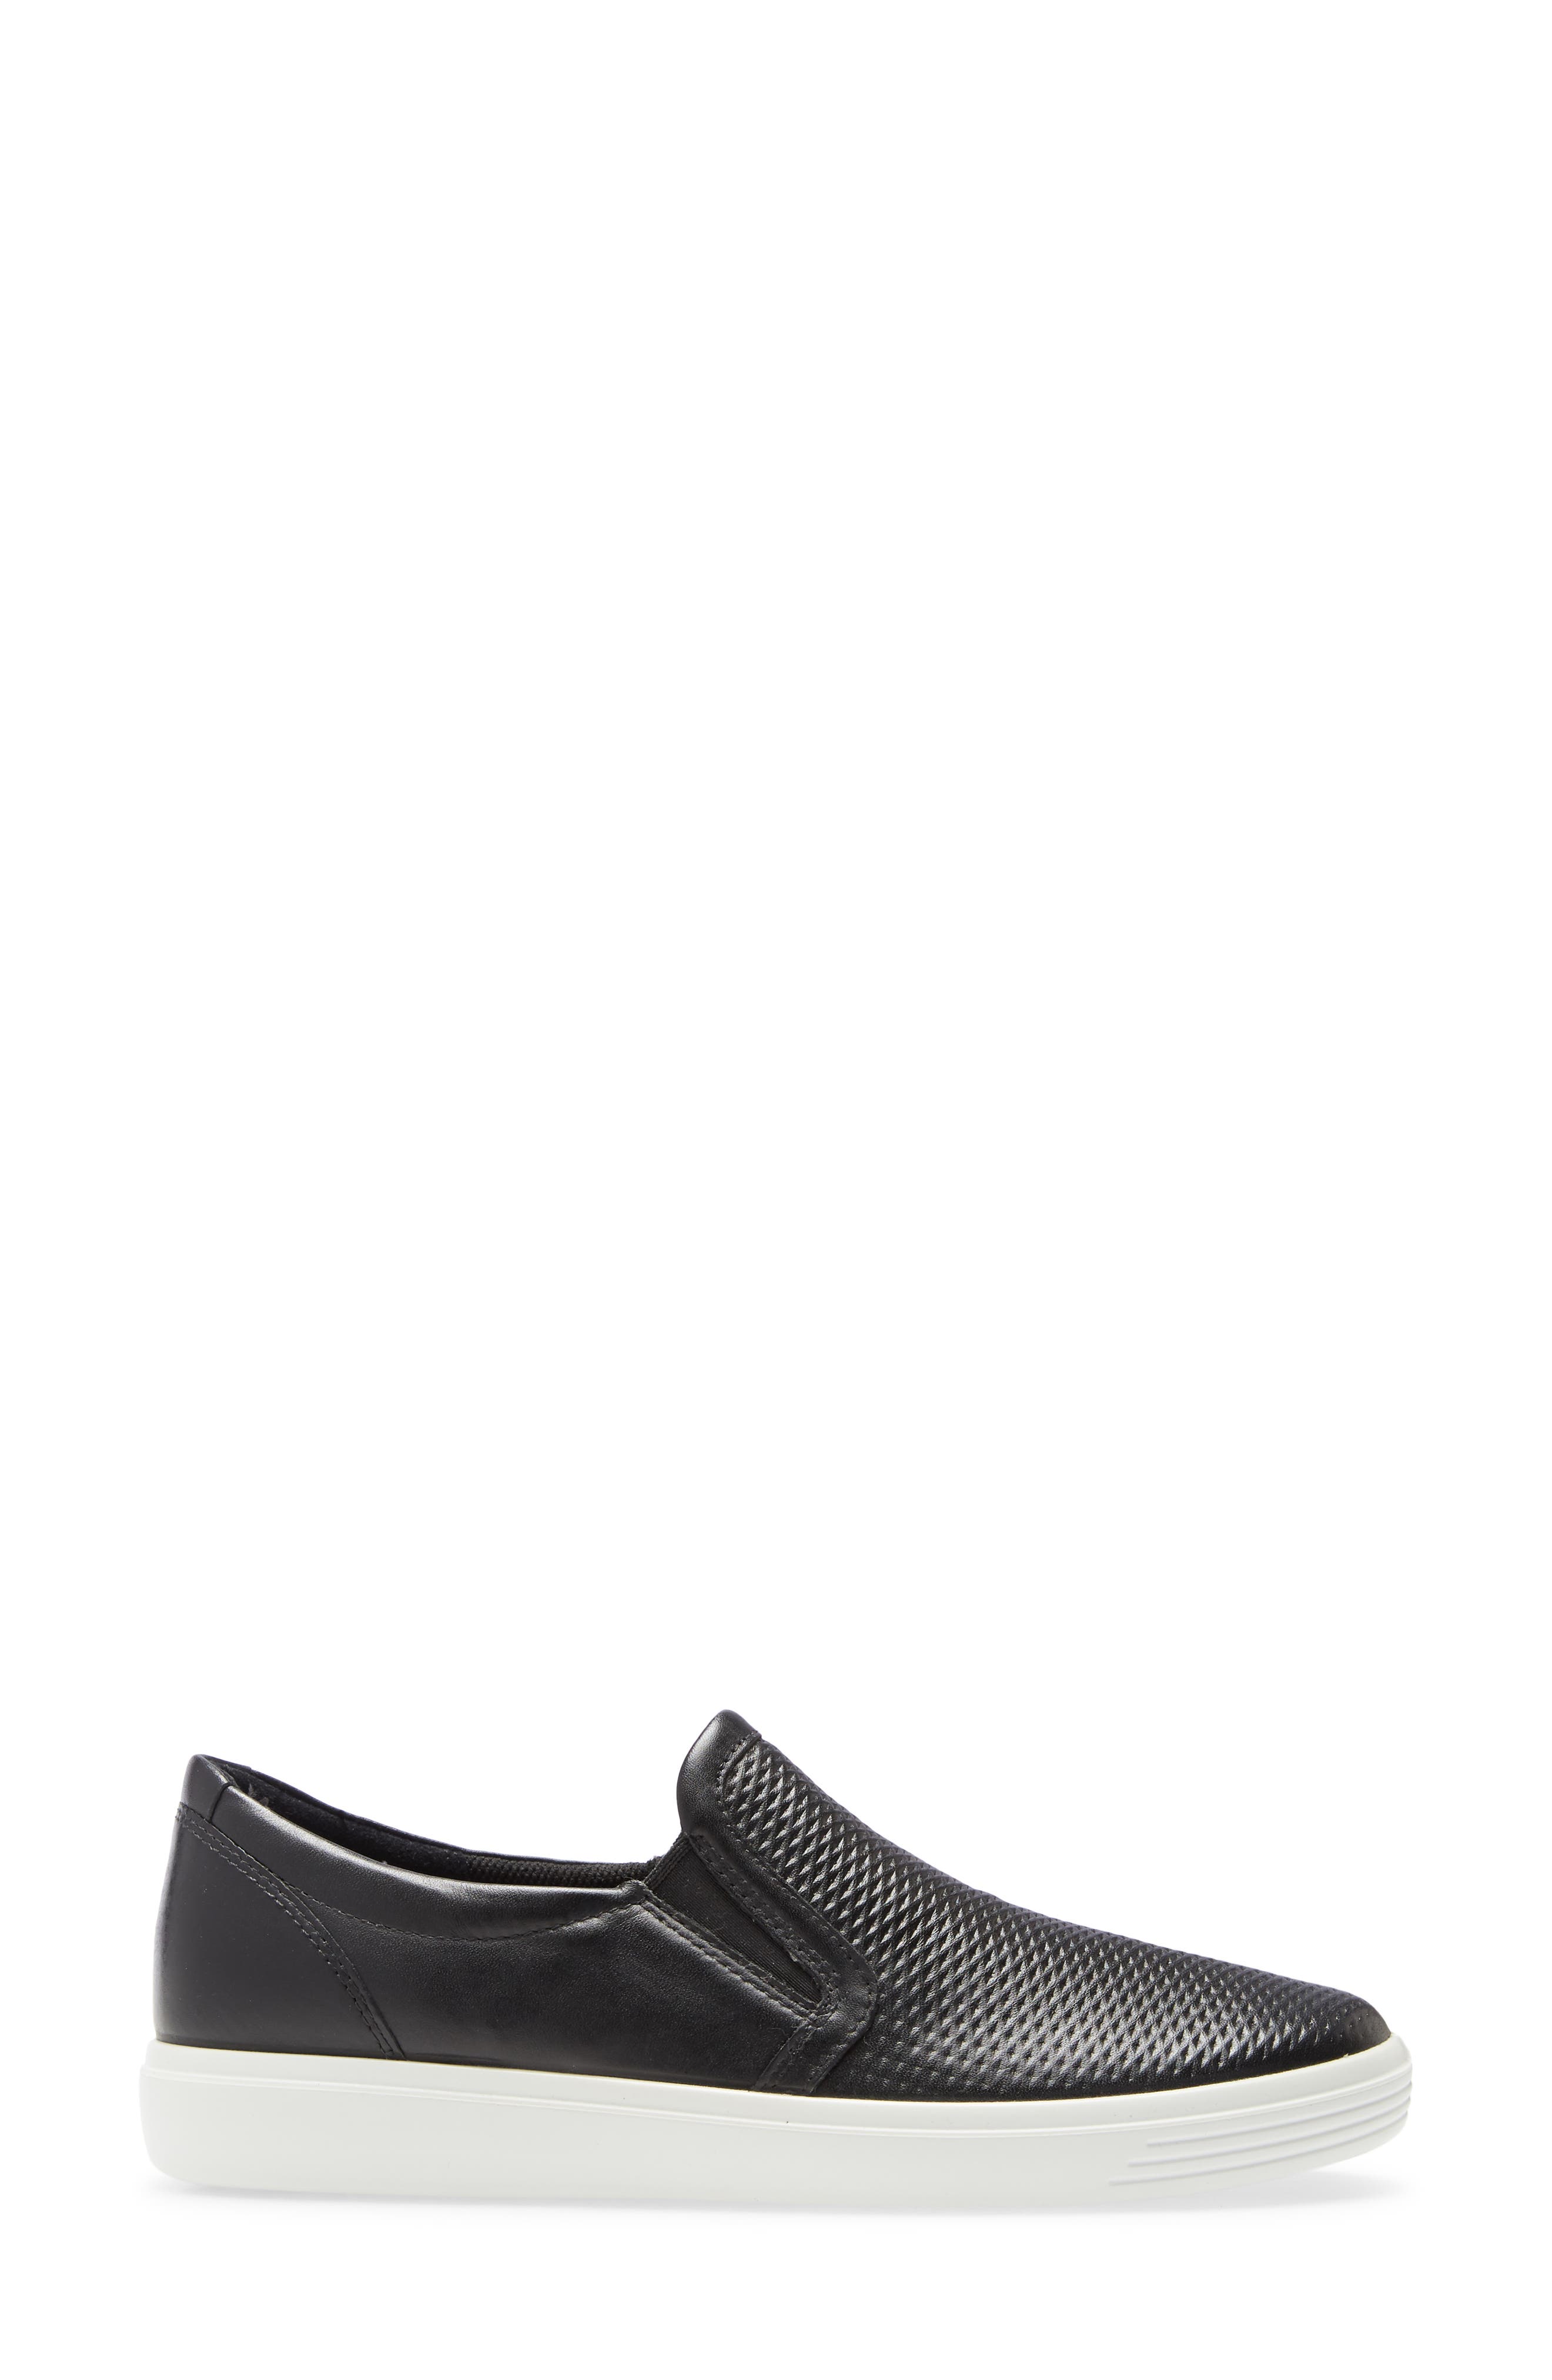 ECCO | Soft Classic Perforated Leather Slip-On Sneaker | Nordstrom Rack